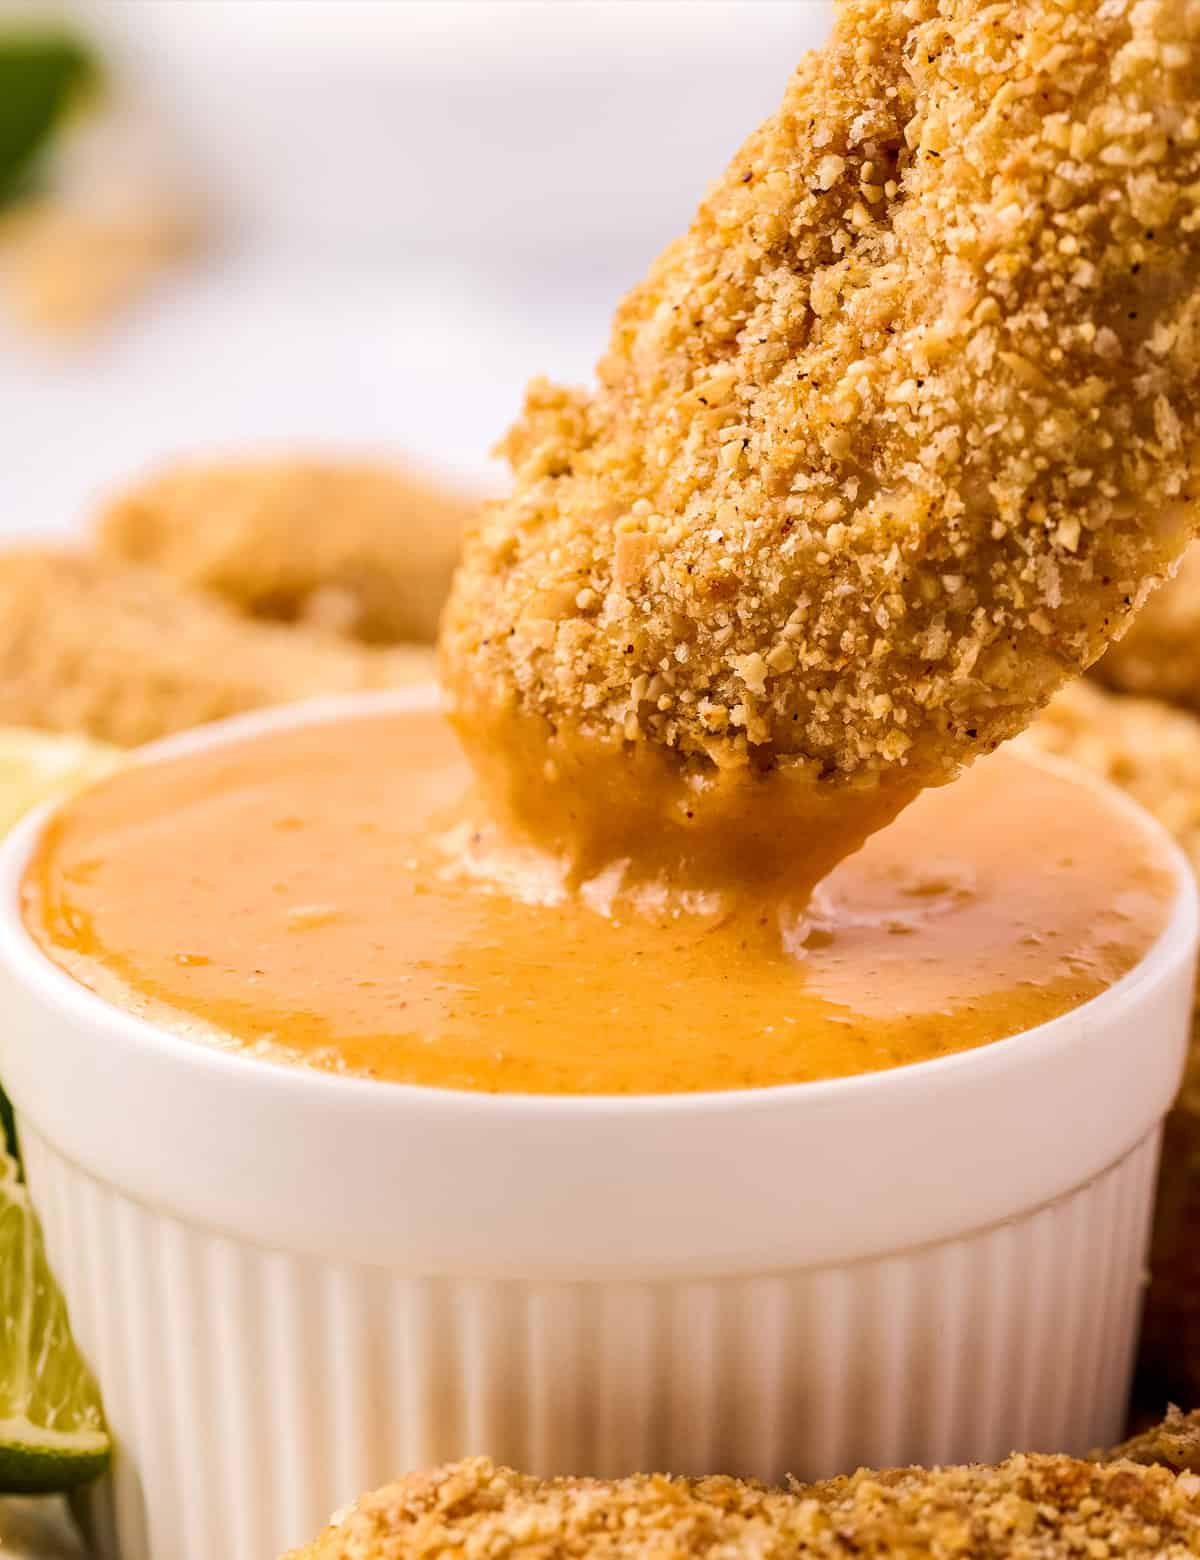 These chicken tenders are coated in an incredible cashew/coconut crust, and dipped in a simple, yet oh so delicious, fiery mango dipping sauce. Baked instead of fried, this easy chicken recipe is perfect for a weeknight meal!